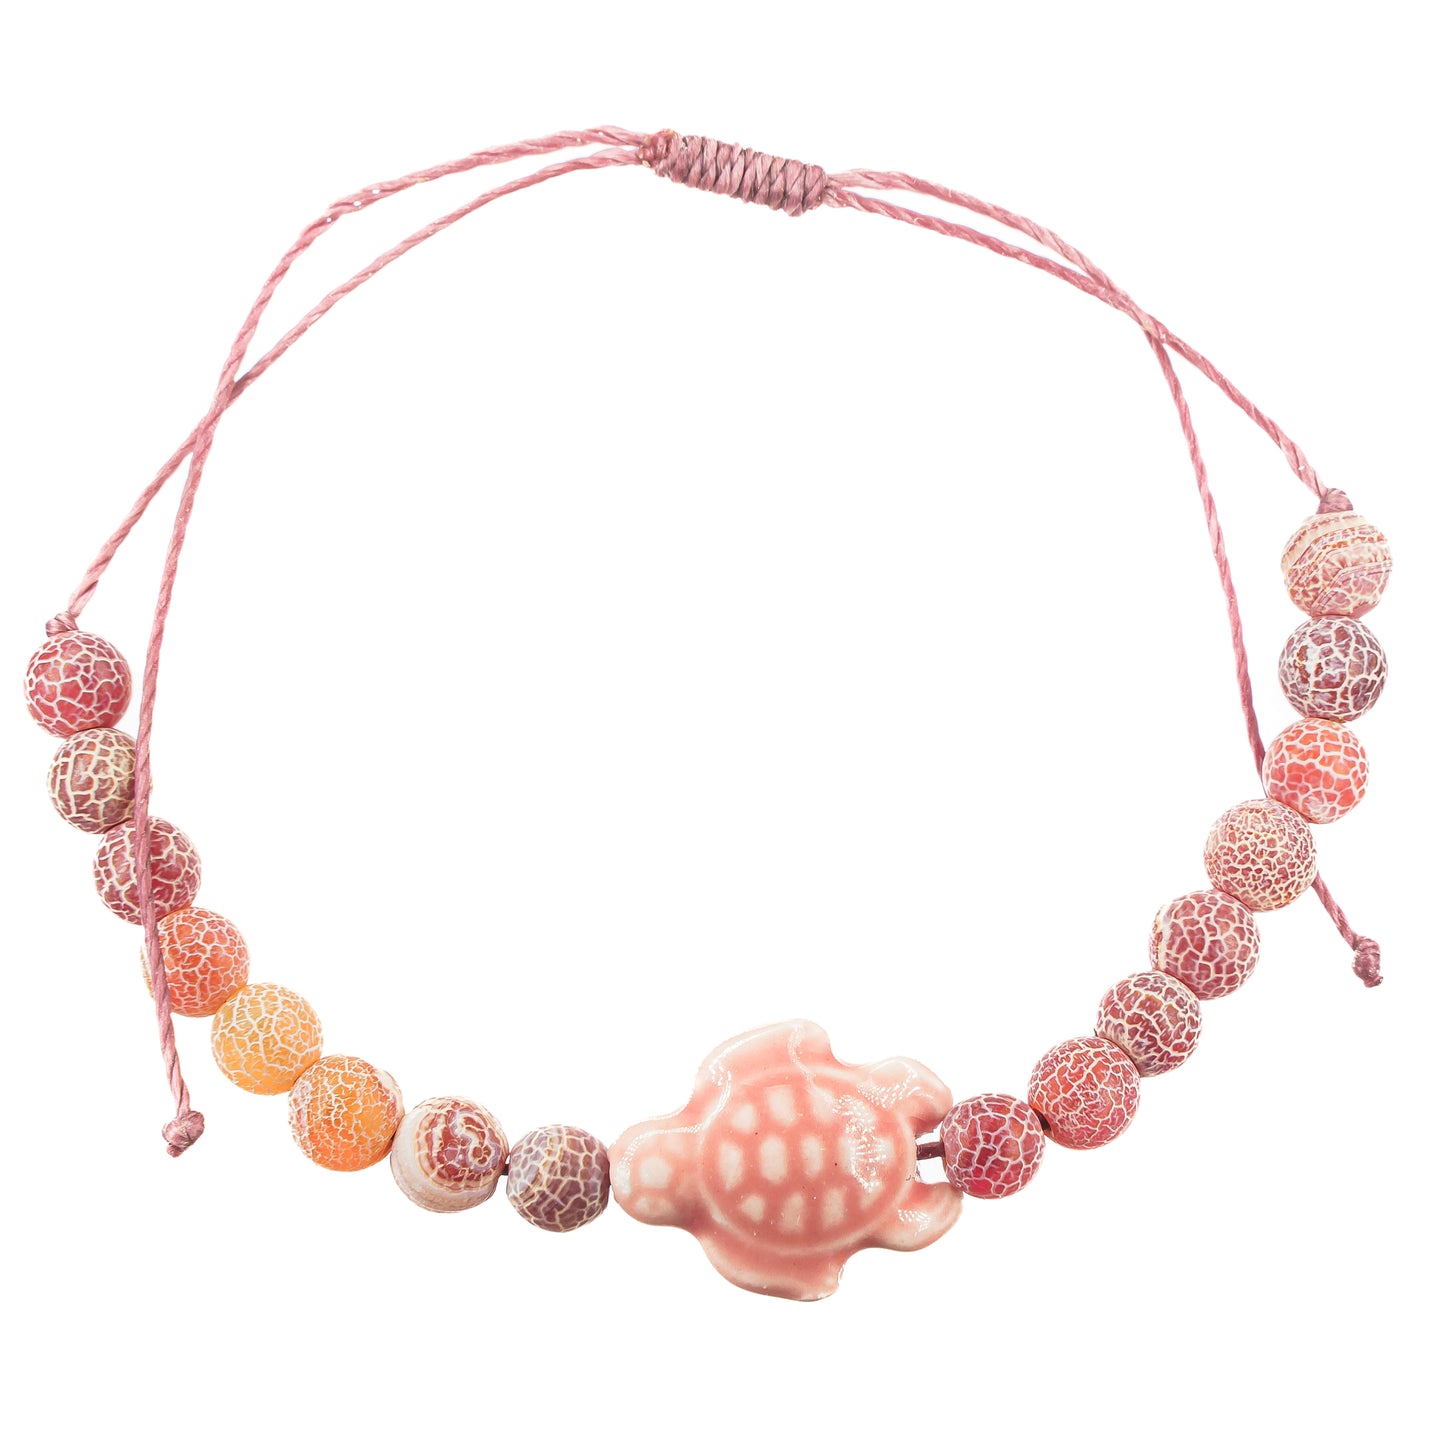 Cracked Agate Beads Turtle Anklet